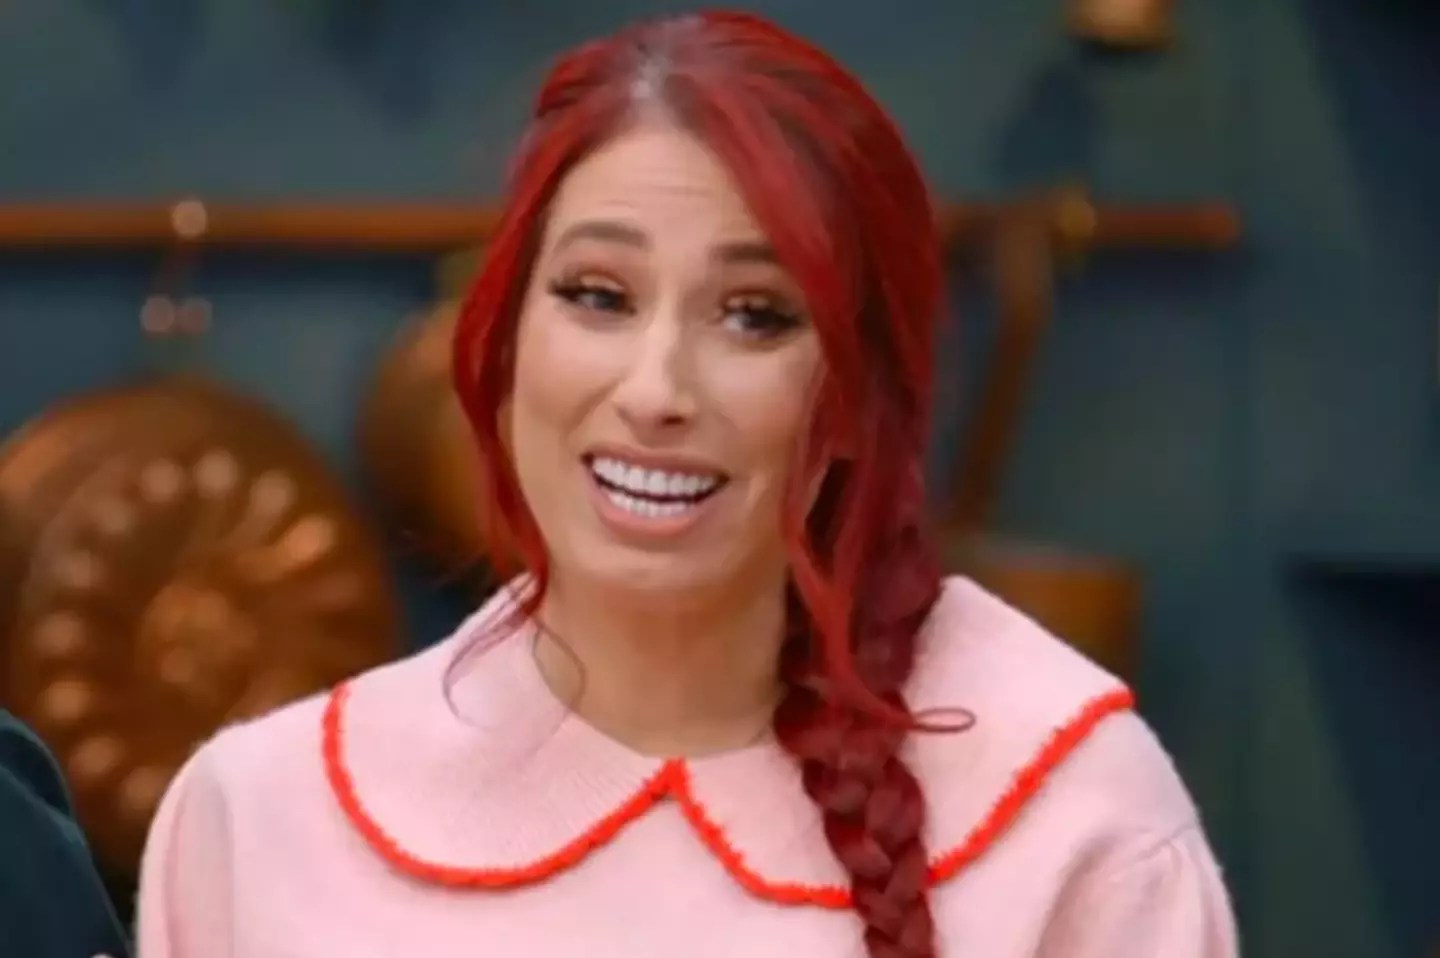 Stacey Solomon joined Bake Off: The Professionals last year.